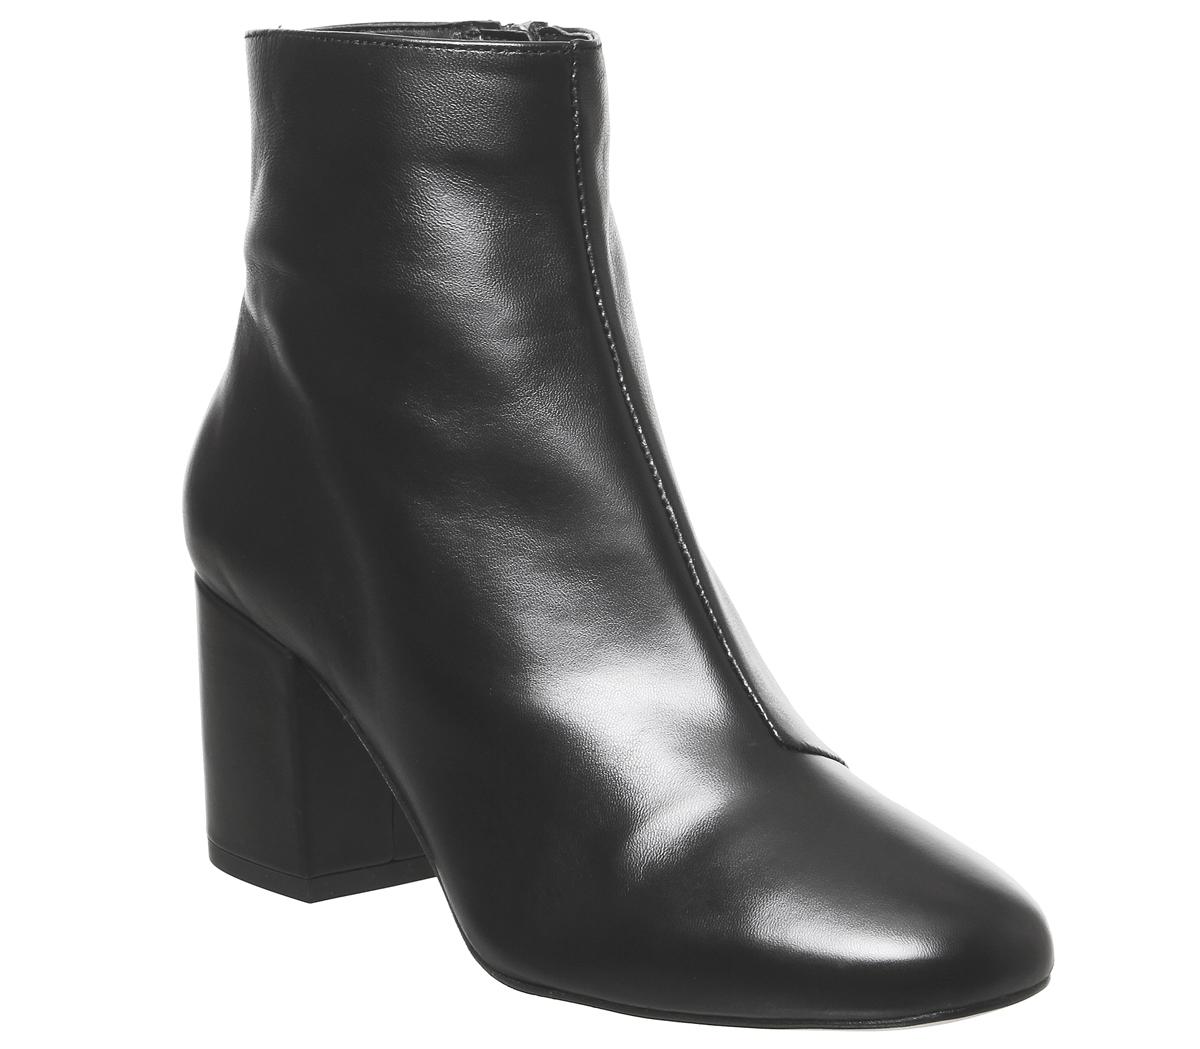 OFFICE Amoretti Black Heel Boots Black Leather - Women's Ankle Boots